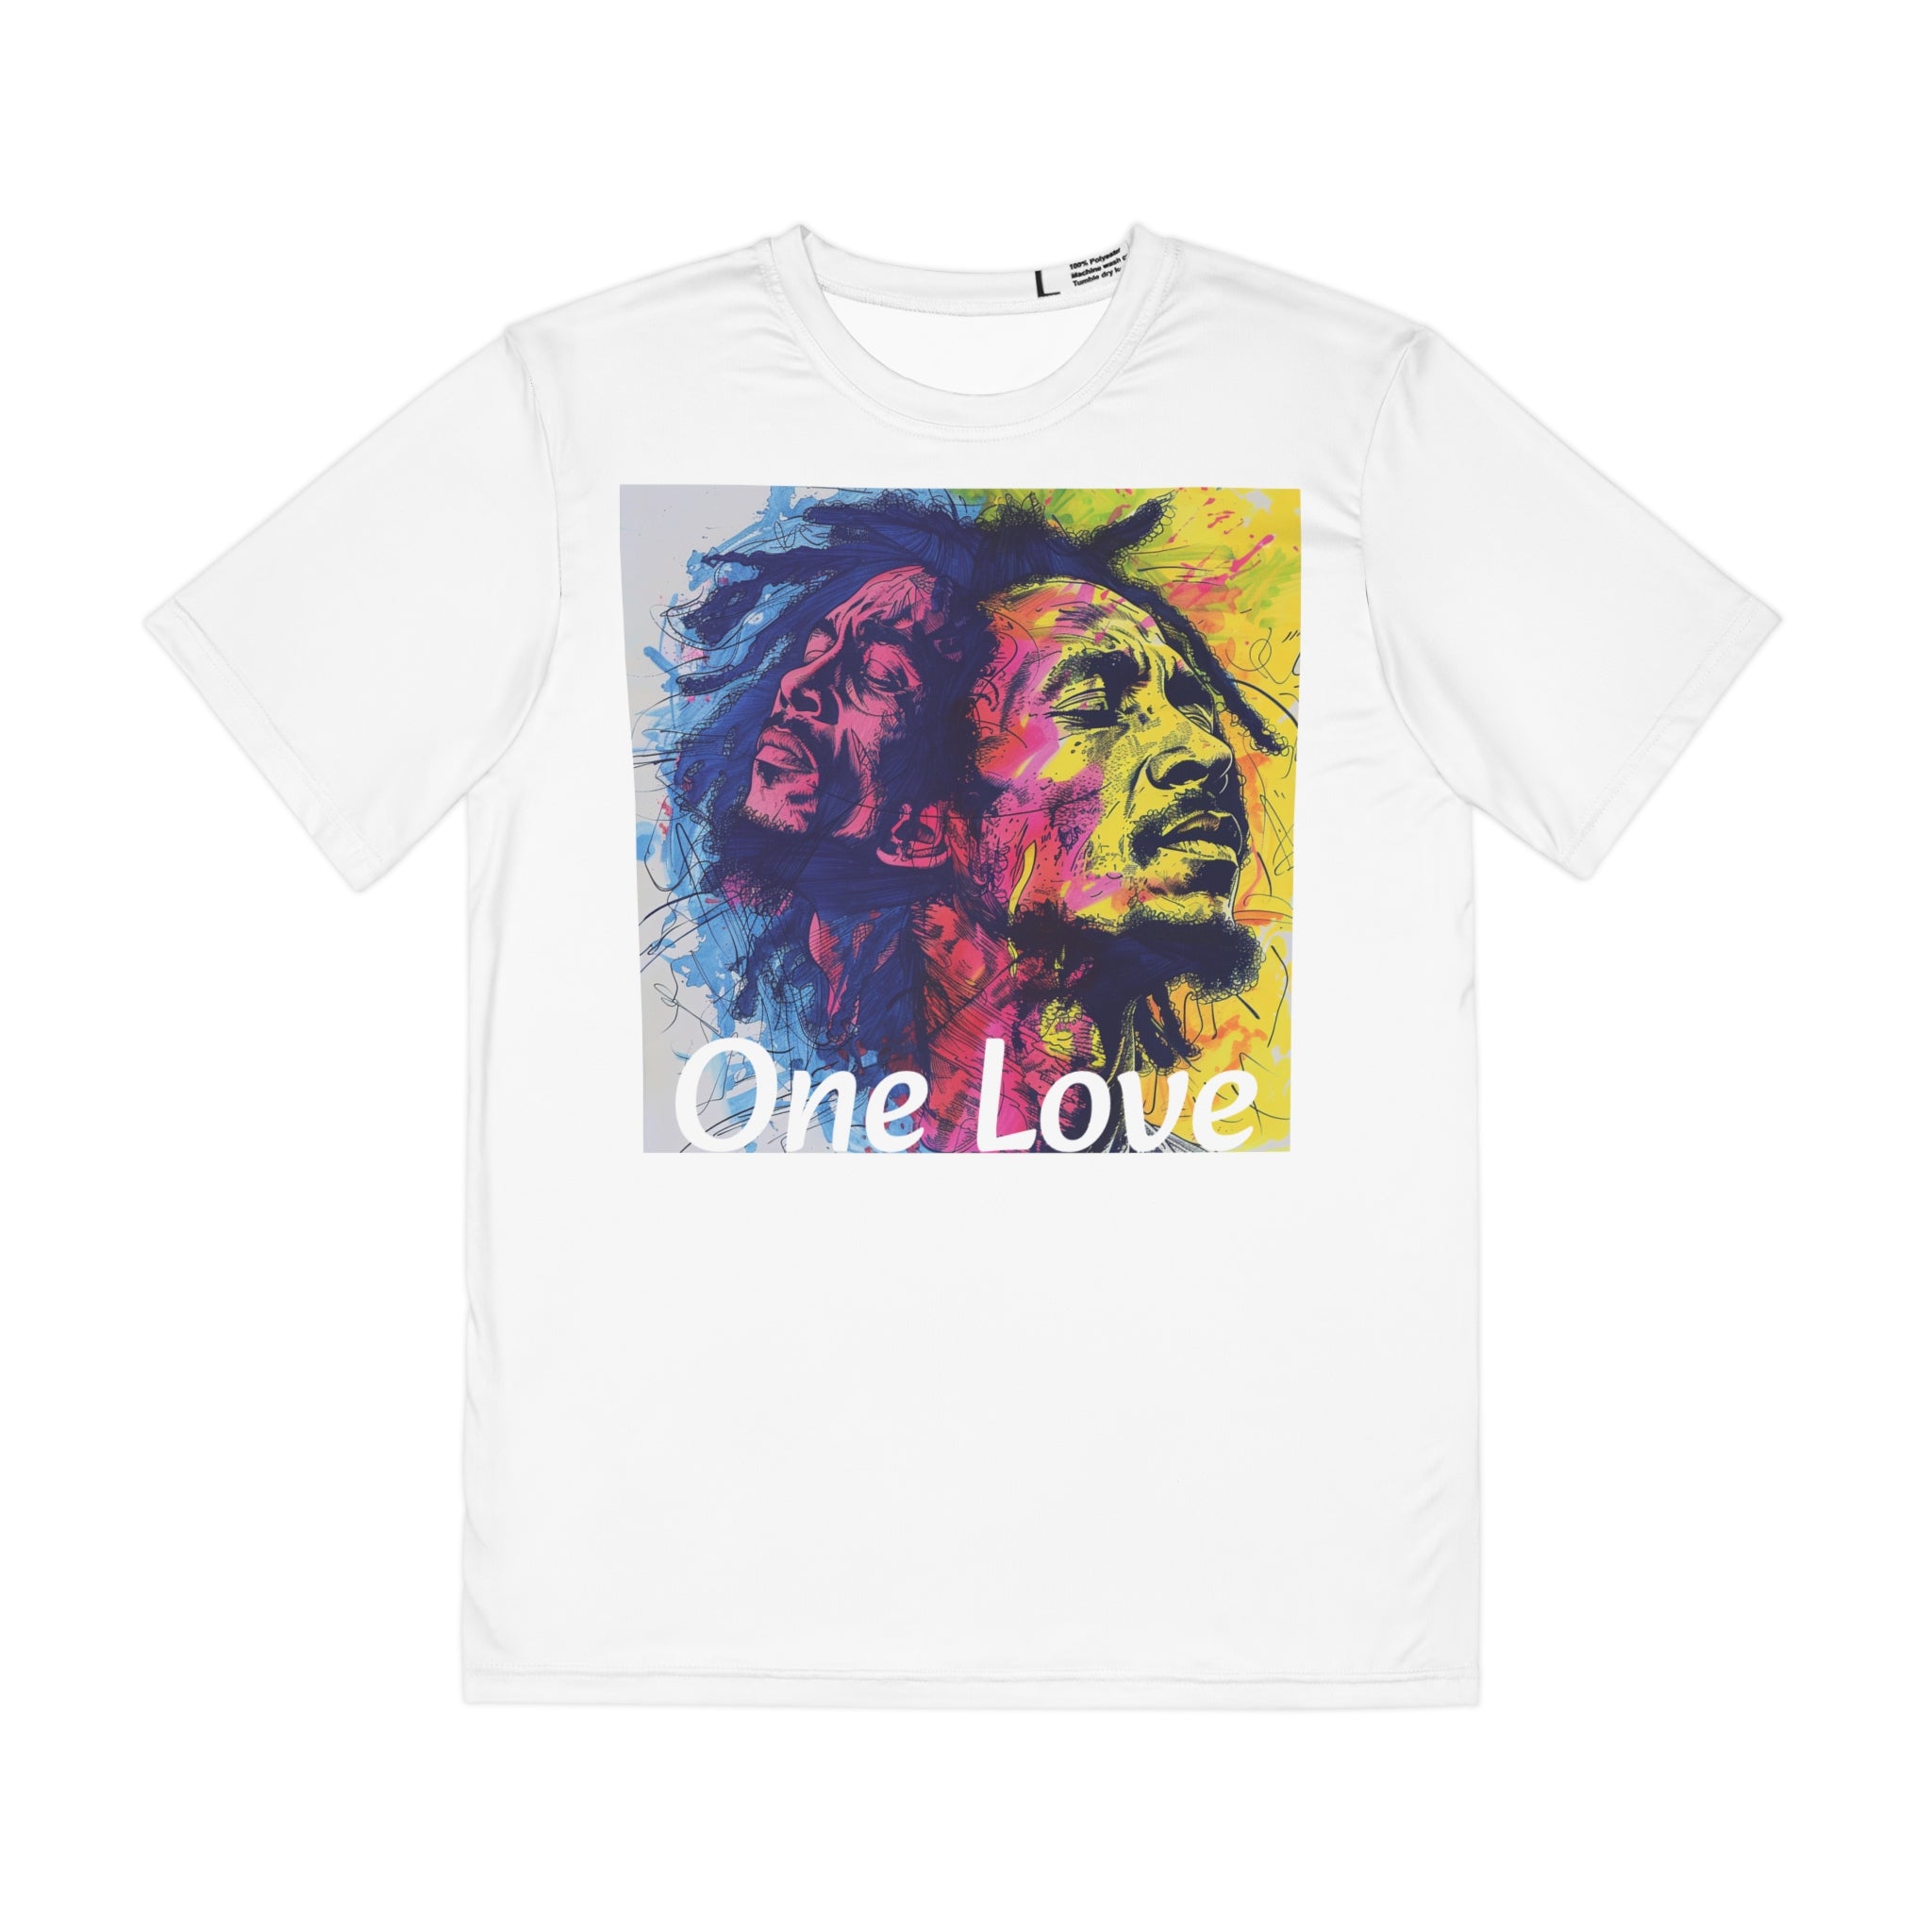 The image showcases a men's polyester tee adorned with a vivid, all-over print dedicated to Bob Marley. The design bursts with colors and symbolic references to Marley's artistry and message, all captured in high-quality fabric that highlights the tee's comfort and visual appeal